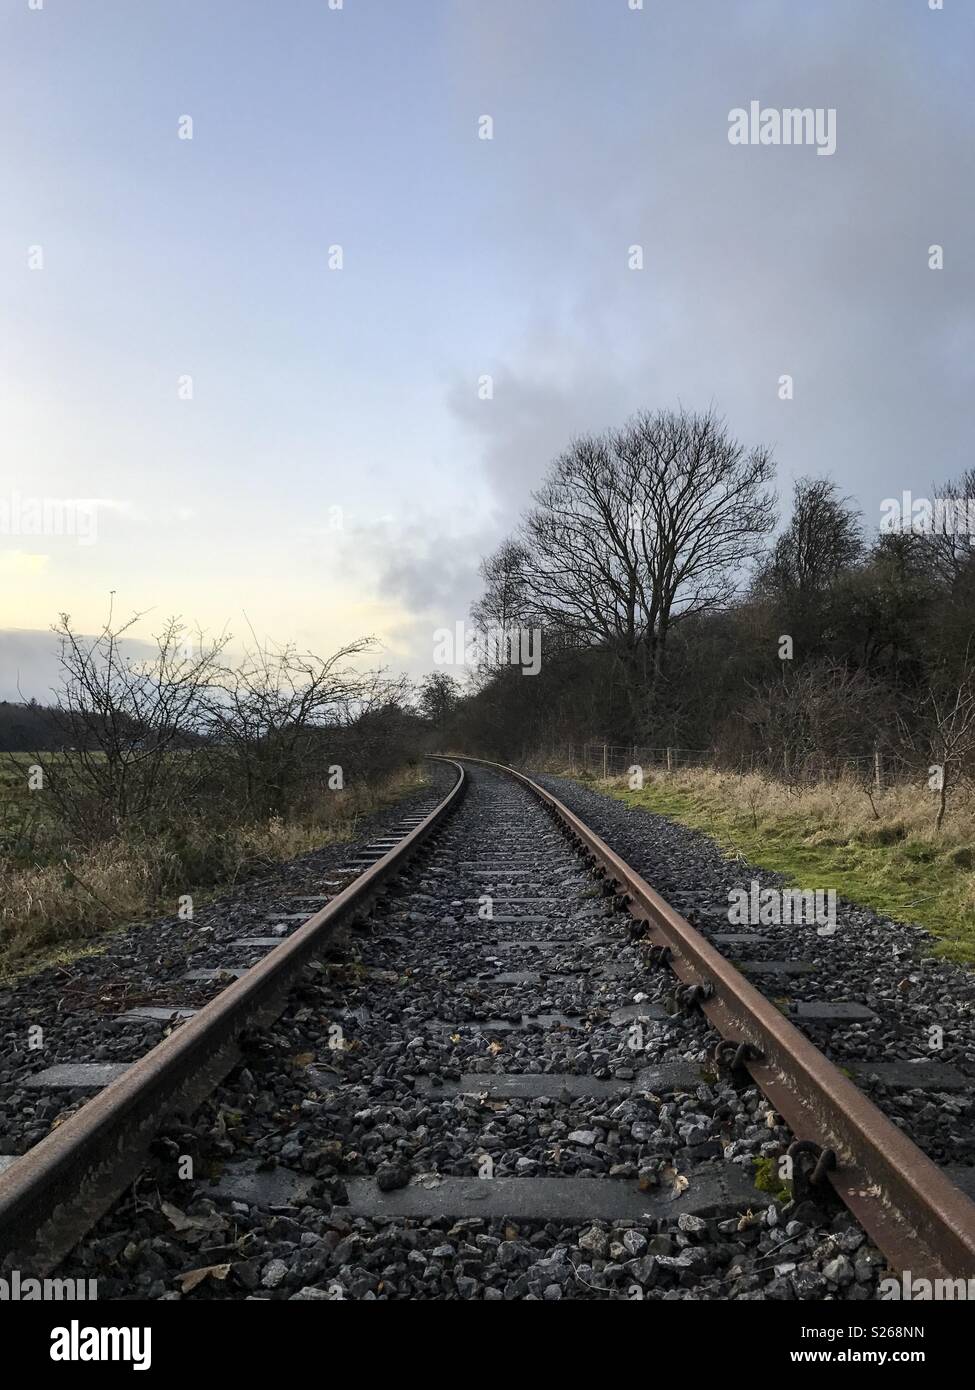 Looking up old railway tracks in County Durham, England. Stock Photo